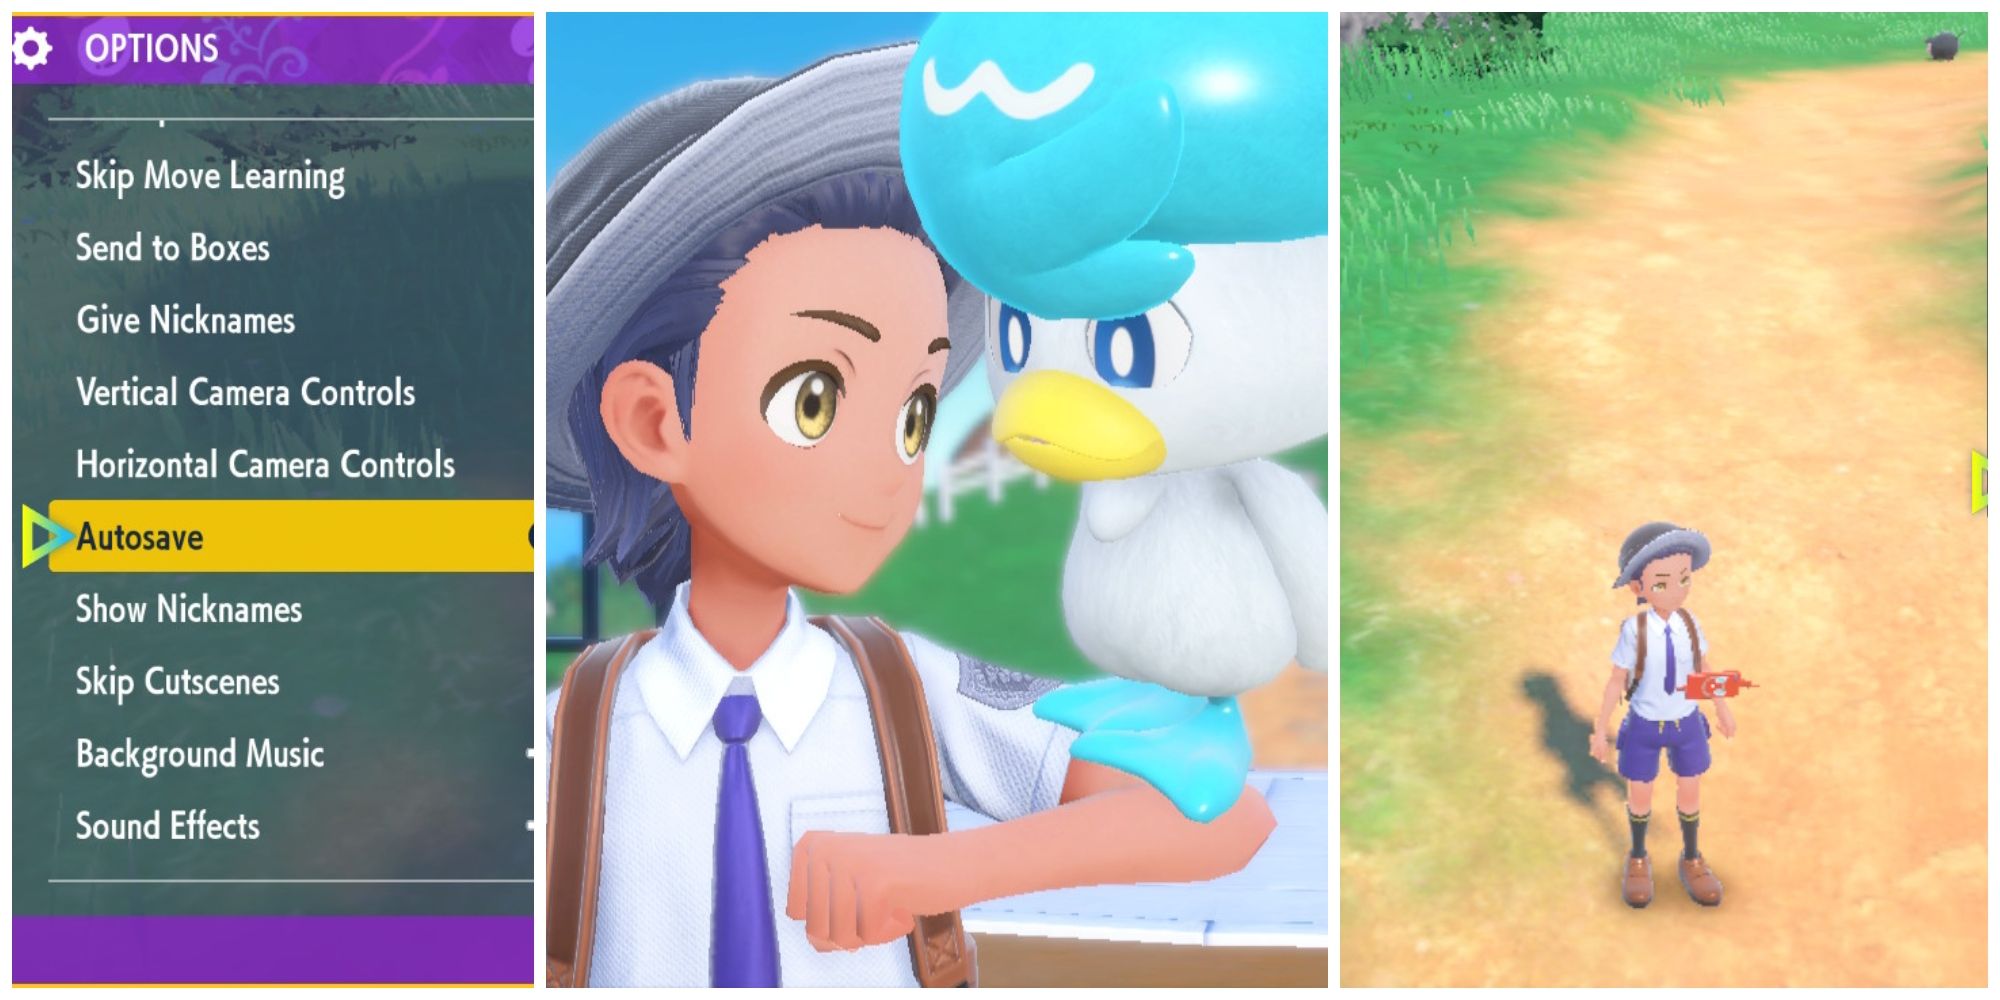 Video Games on X: Pre-order Pokémon Scarlet, Pokémon Violet, or Pokémon  Scarlet and Pokémon Violet Double Pack, and receive a download code for an  exclusive in-game Healing Set.    /